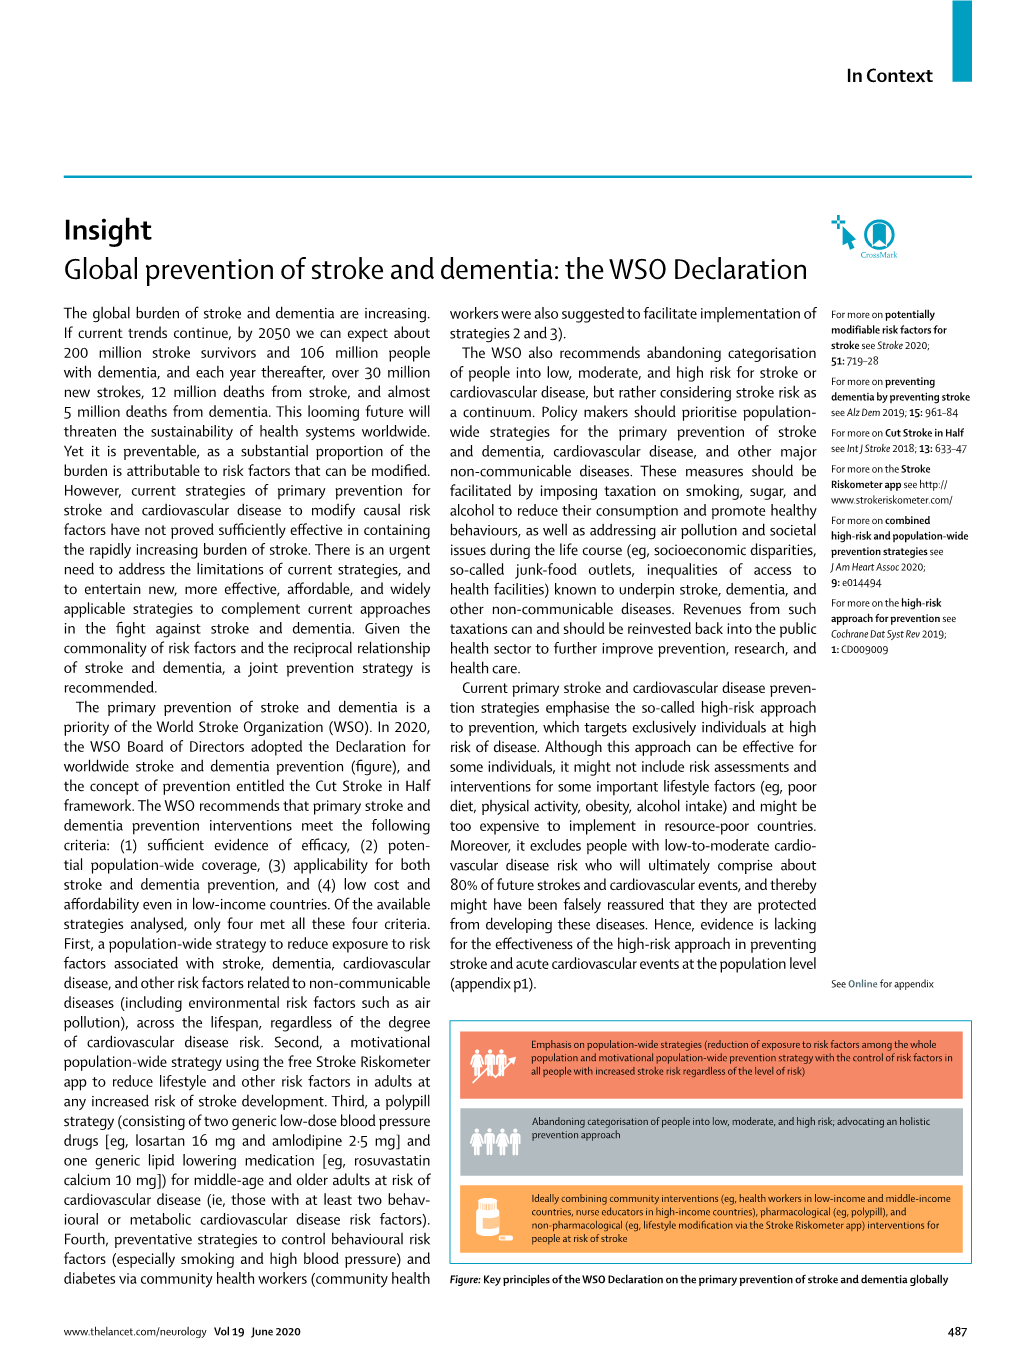 Global Prevention of Stroke and Dementia: the WSO Declaration